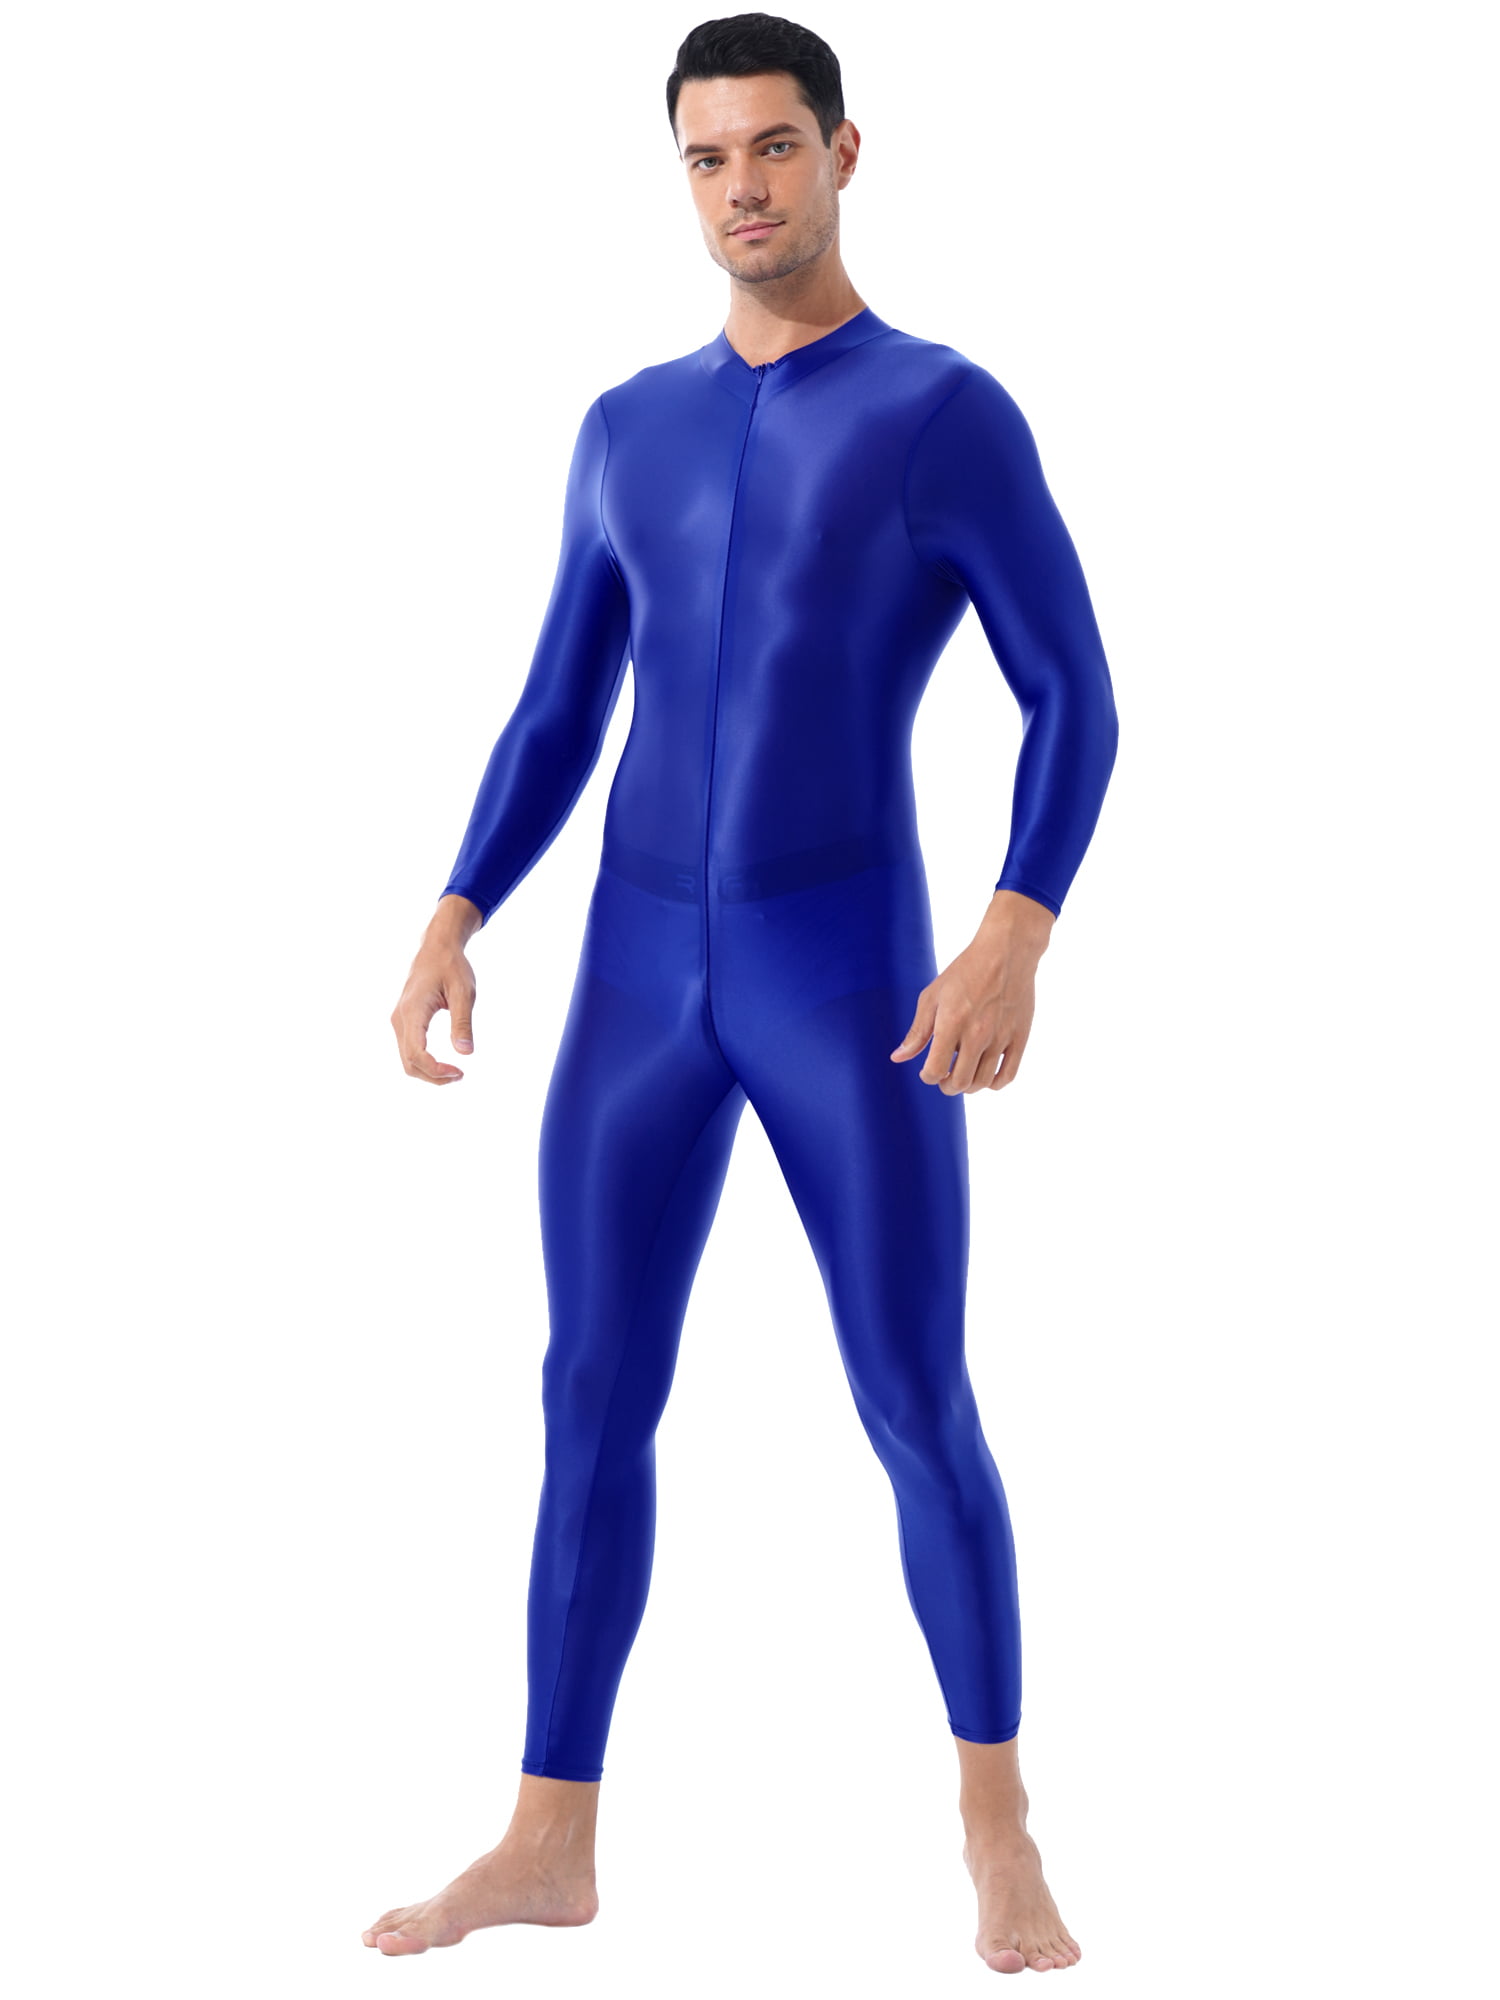 YEAHDOR Mens One-Piece Full Body Stocking Shimmery Skin-Tight Jumpsuit  Double-Ended Zipper Crotch Bodysuit Blue One Size